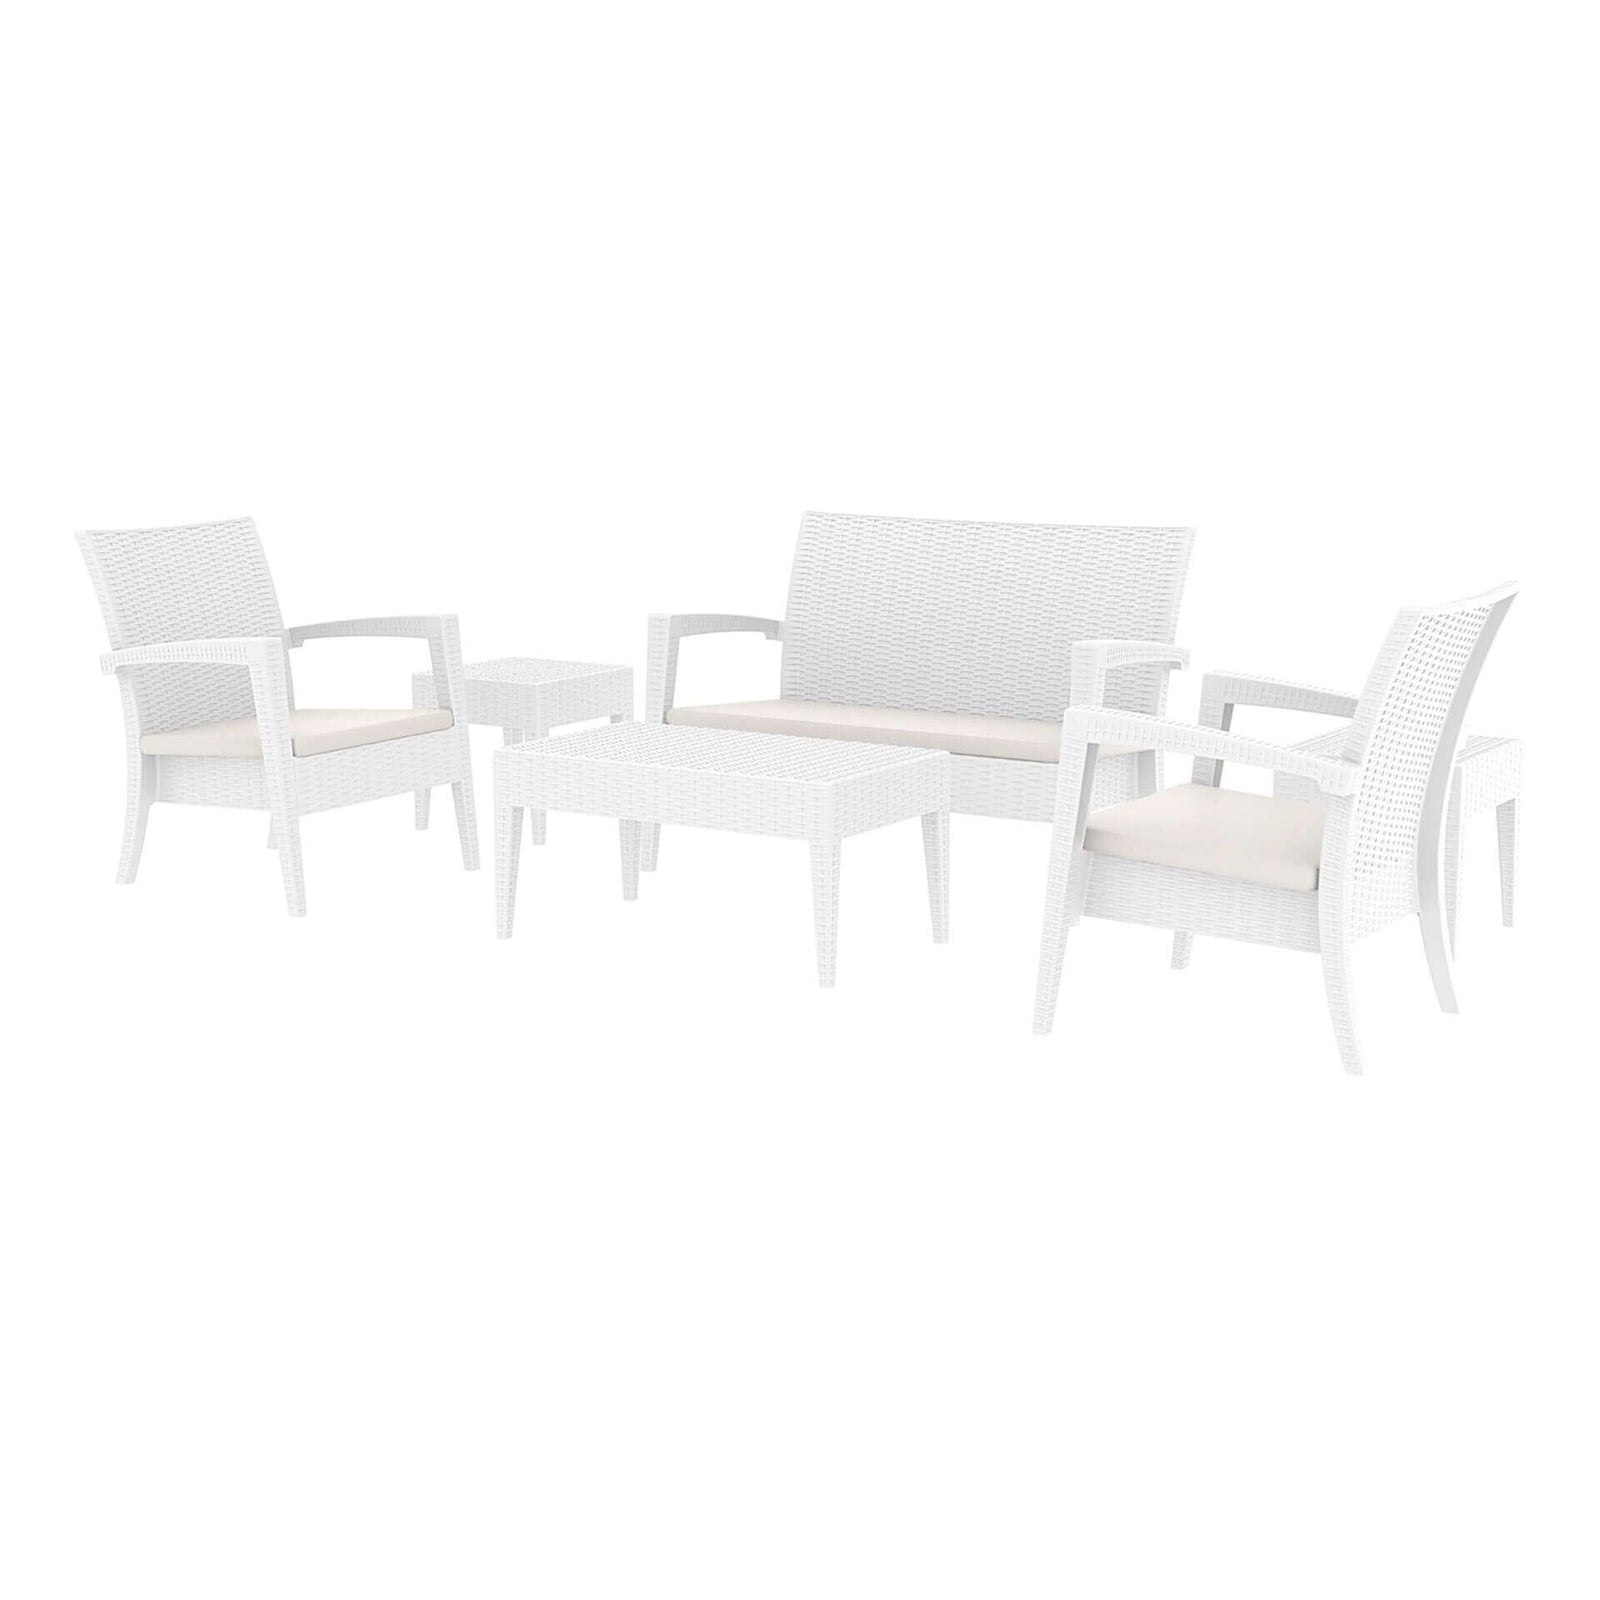 Tequila Lounge Set - White with cushions-Upinteriors